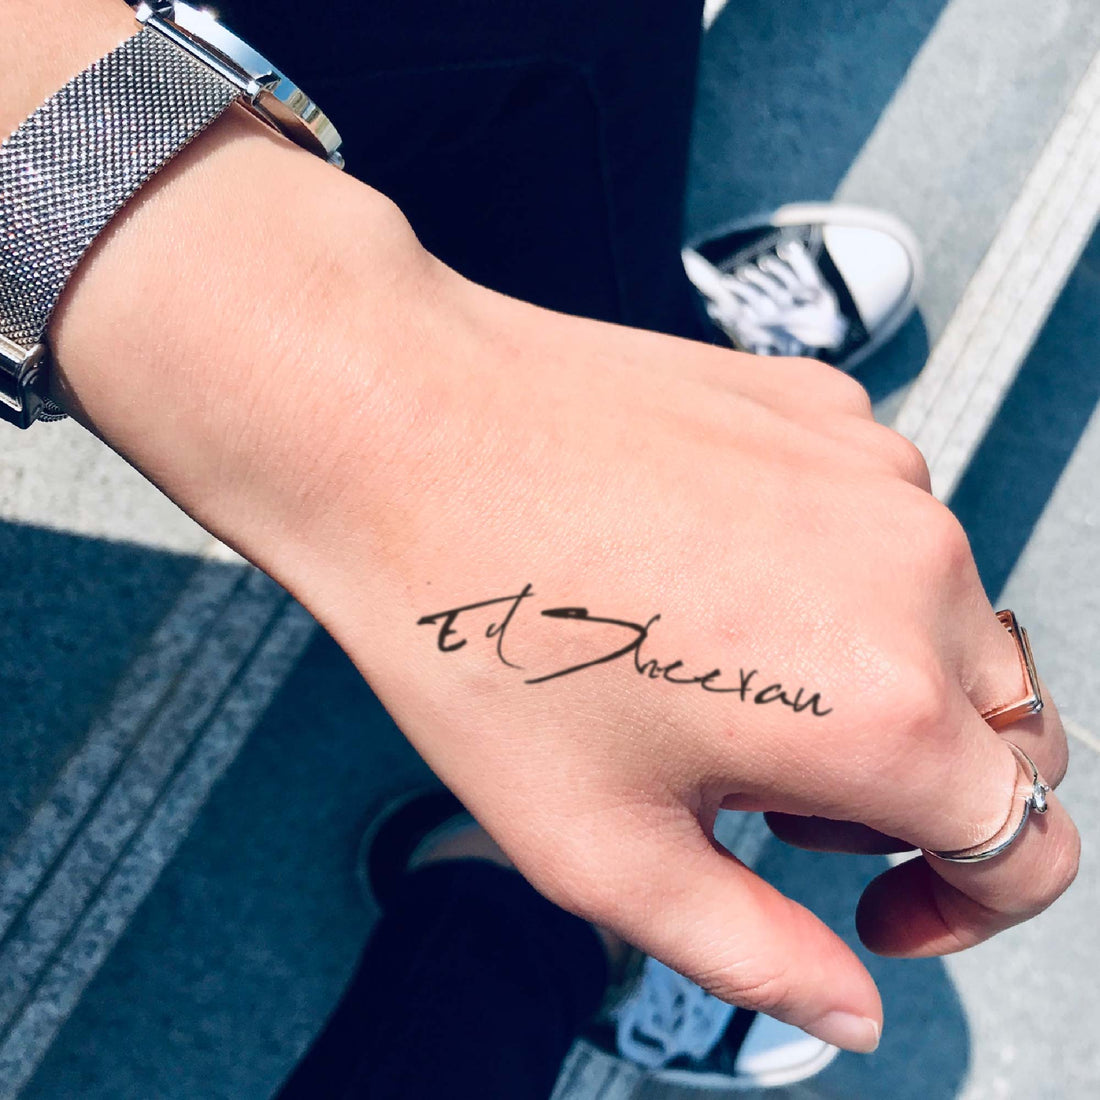 Ed Sheeran custom temporary tattoo sticker design idea inspiration meanings removal arm wrist hand words font name signature calligraphy lyrics tour concert outfits merch accessory gift souvenir costumes wear dress up code